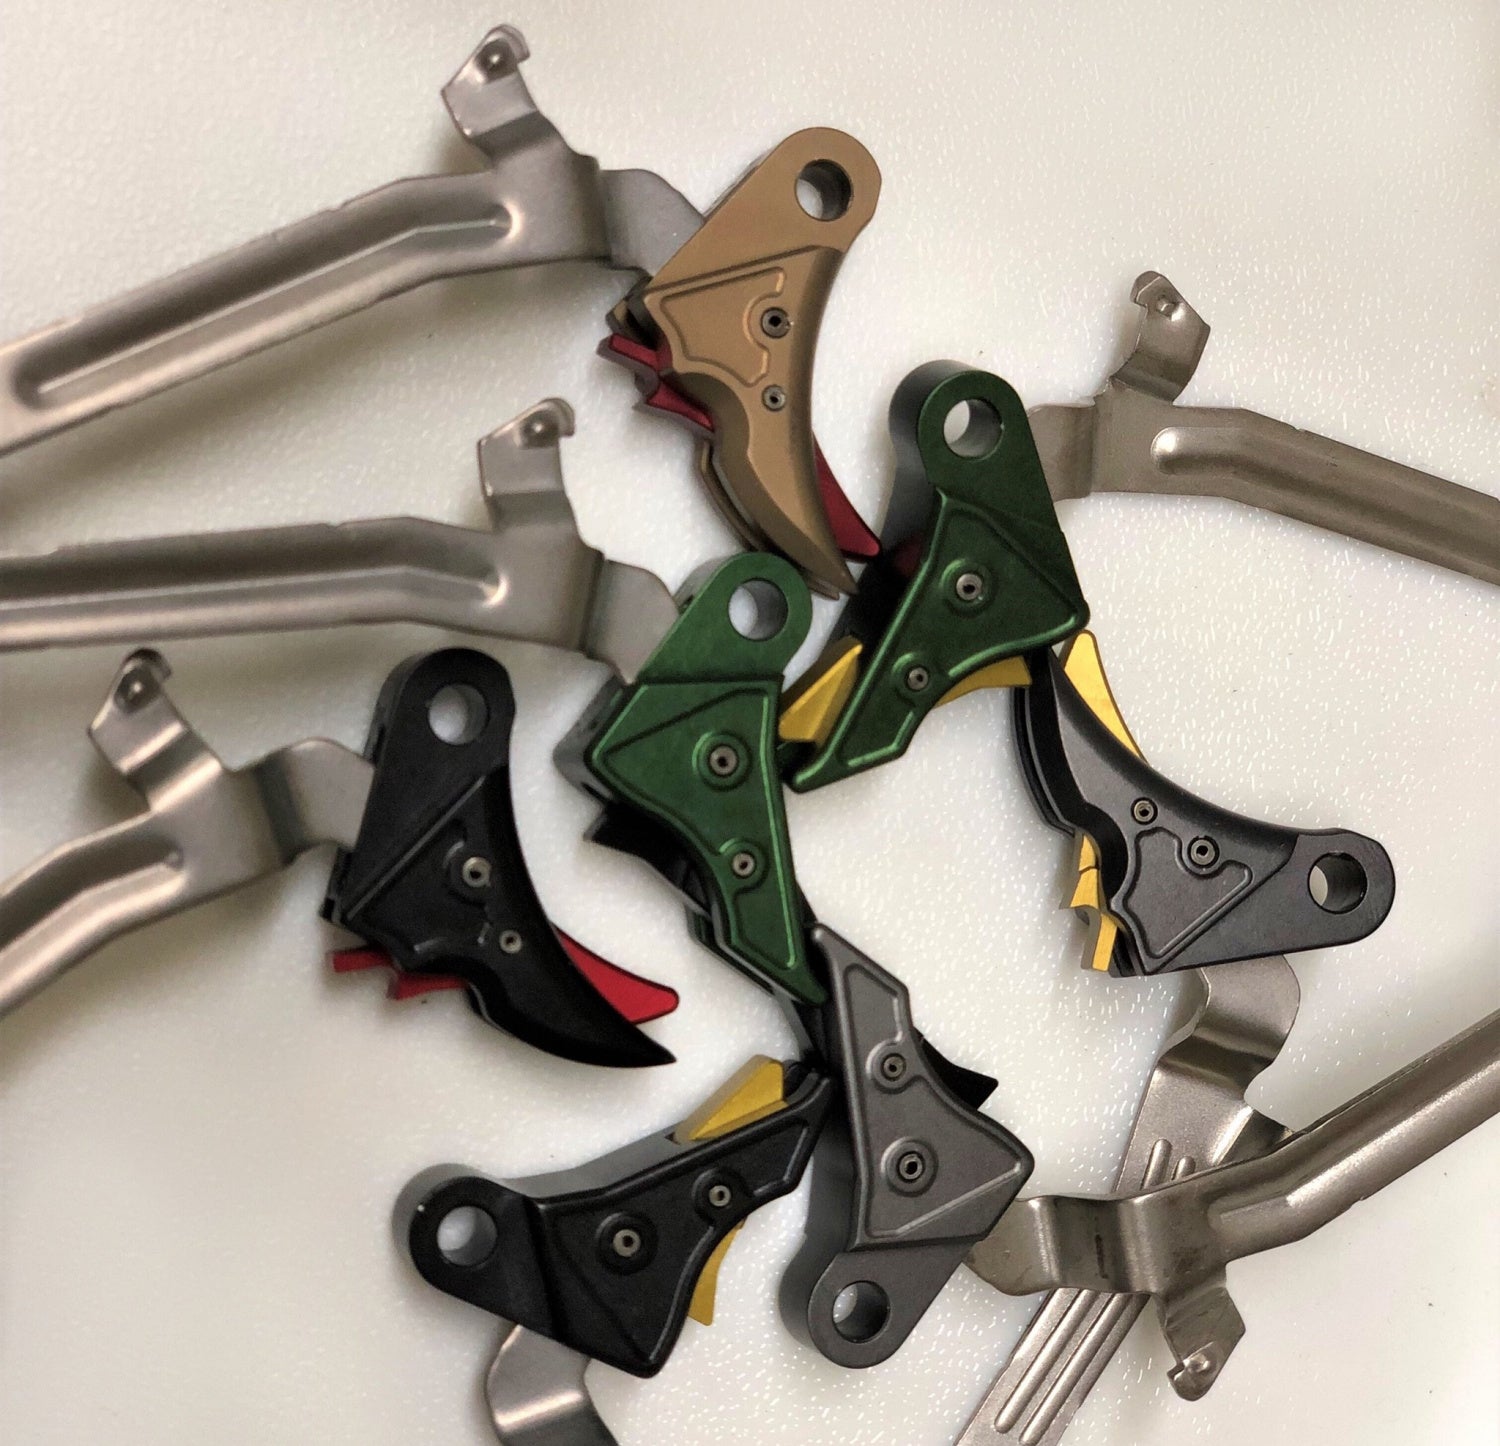 A variety of Overwatch Precision's previous TAC trigger offerings, in black, gunmetal gray, MIL green, and FDE flavors.